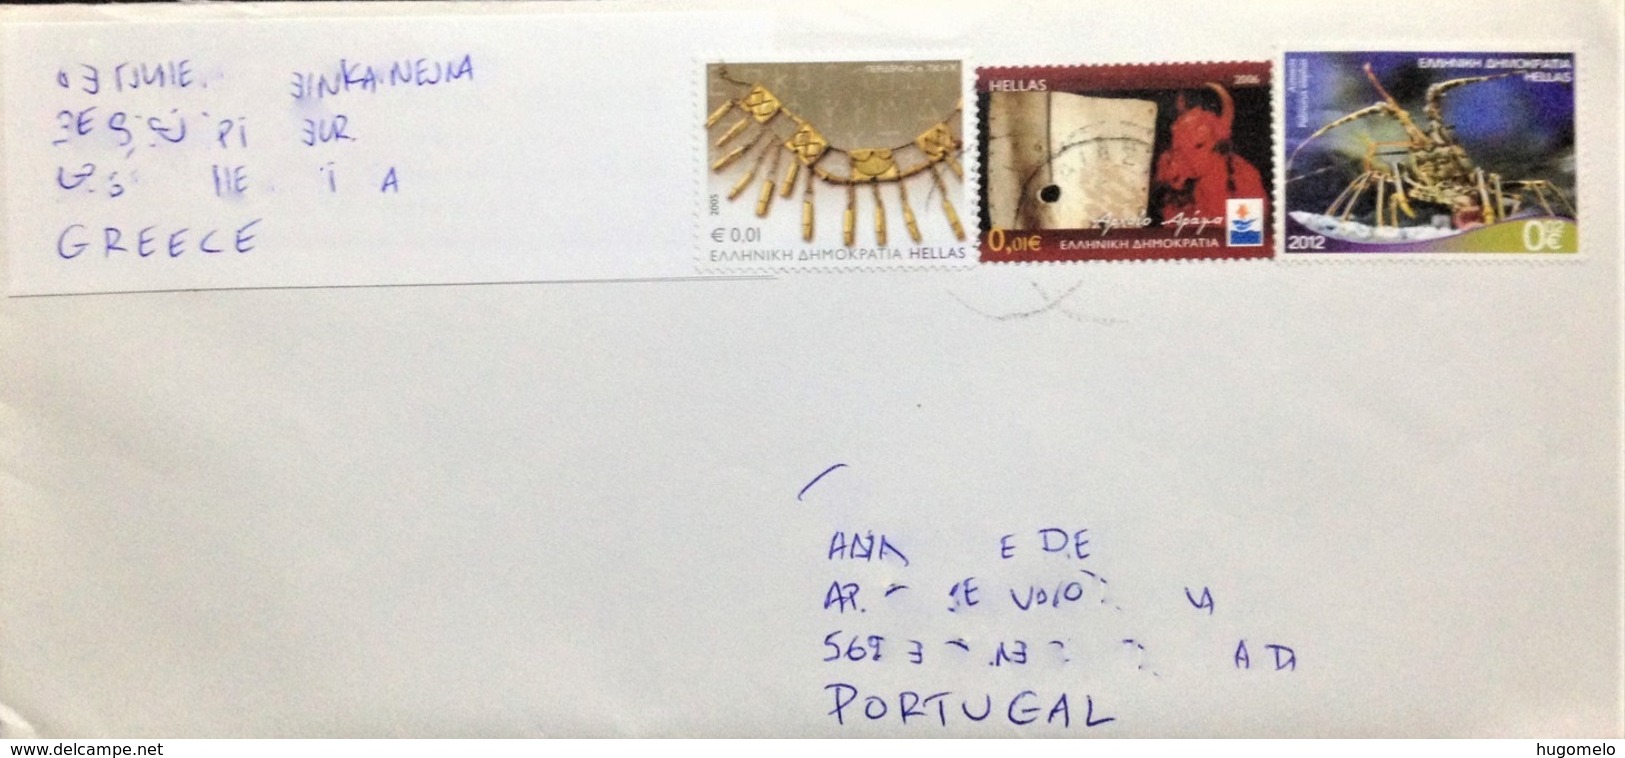 Greece, Circulated Cover To Portugal, "Lobsters", "Crafts", 2012 - Covers & Documents